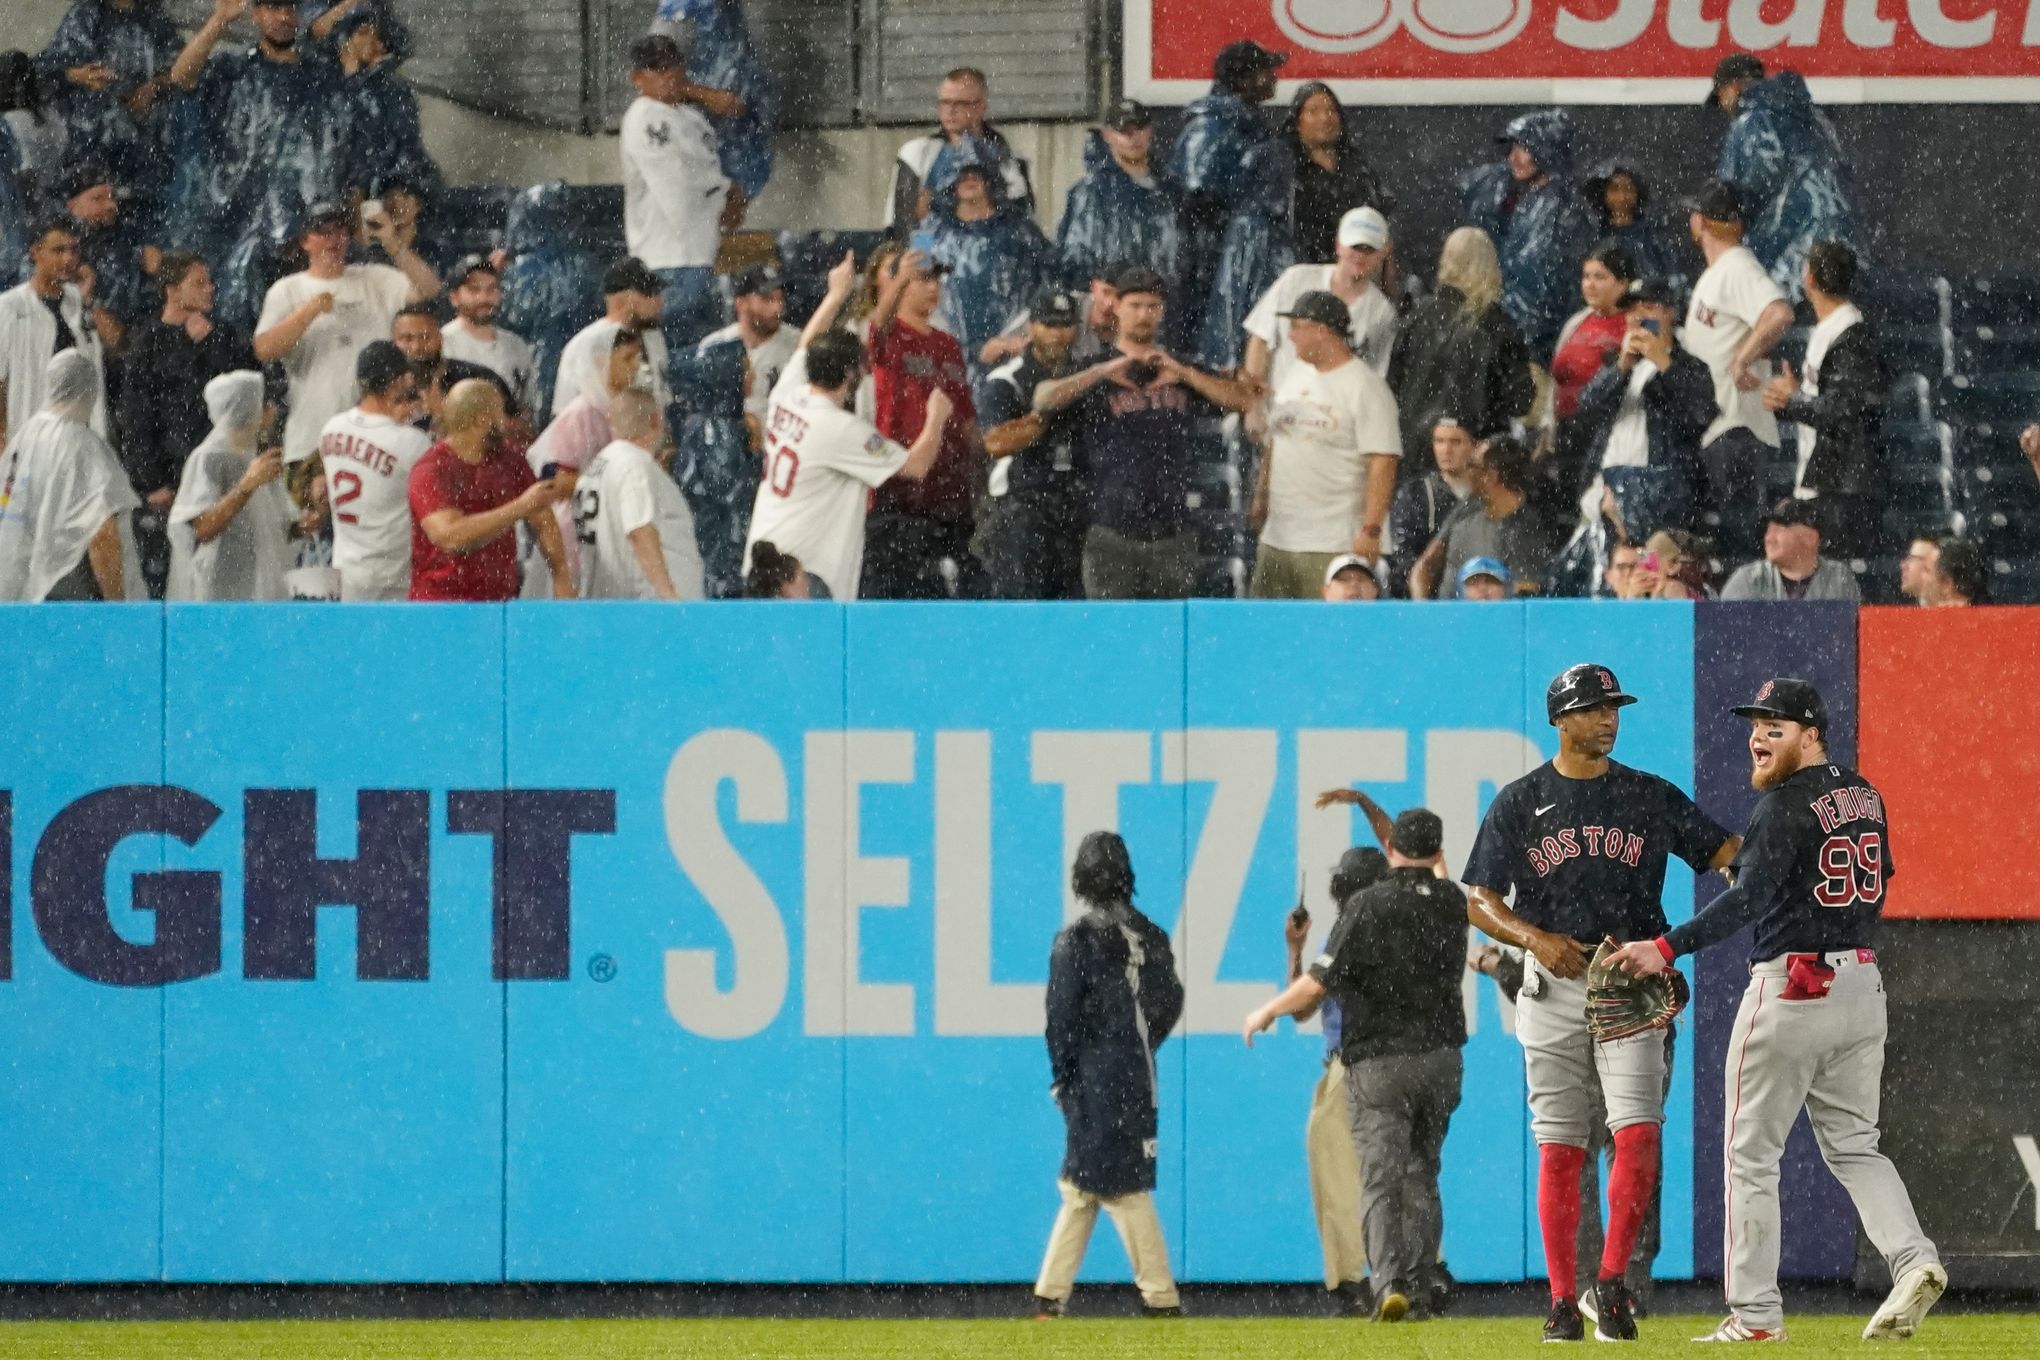 New York fans enraged with Aaron Boone's management as Mariners